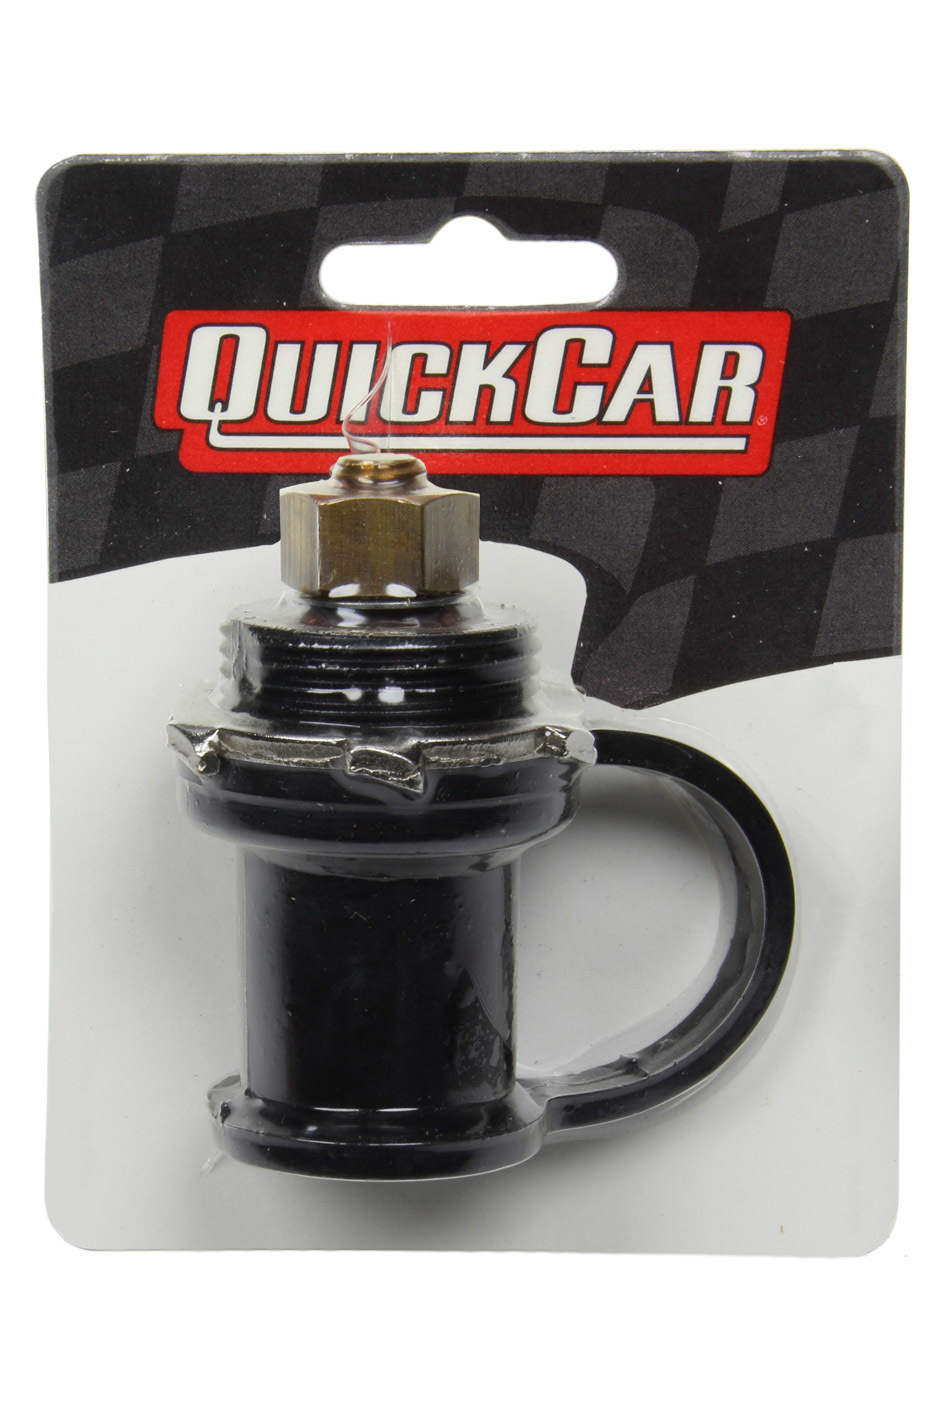 QuickCar 57-702 Remote Battery Terminal, 12V to 16V, 1-1/4 in Diameter Hole, Rubber Cap, Black, Each